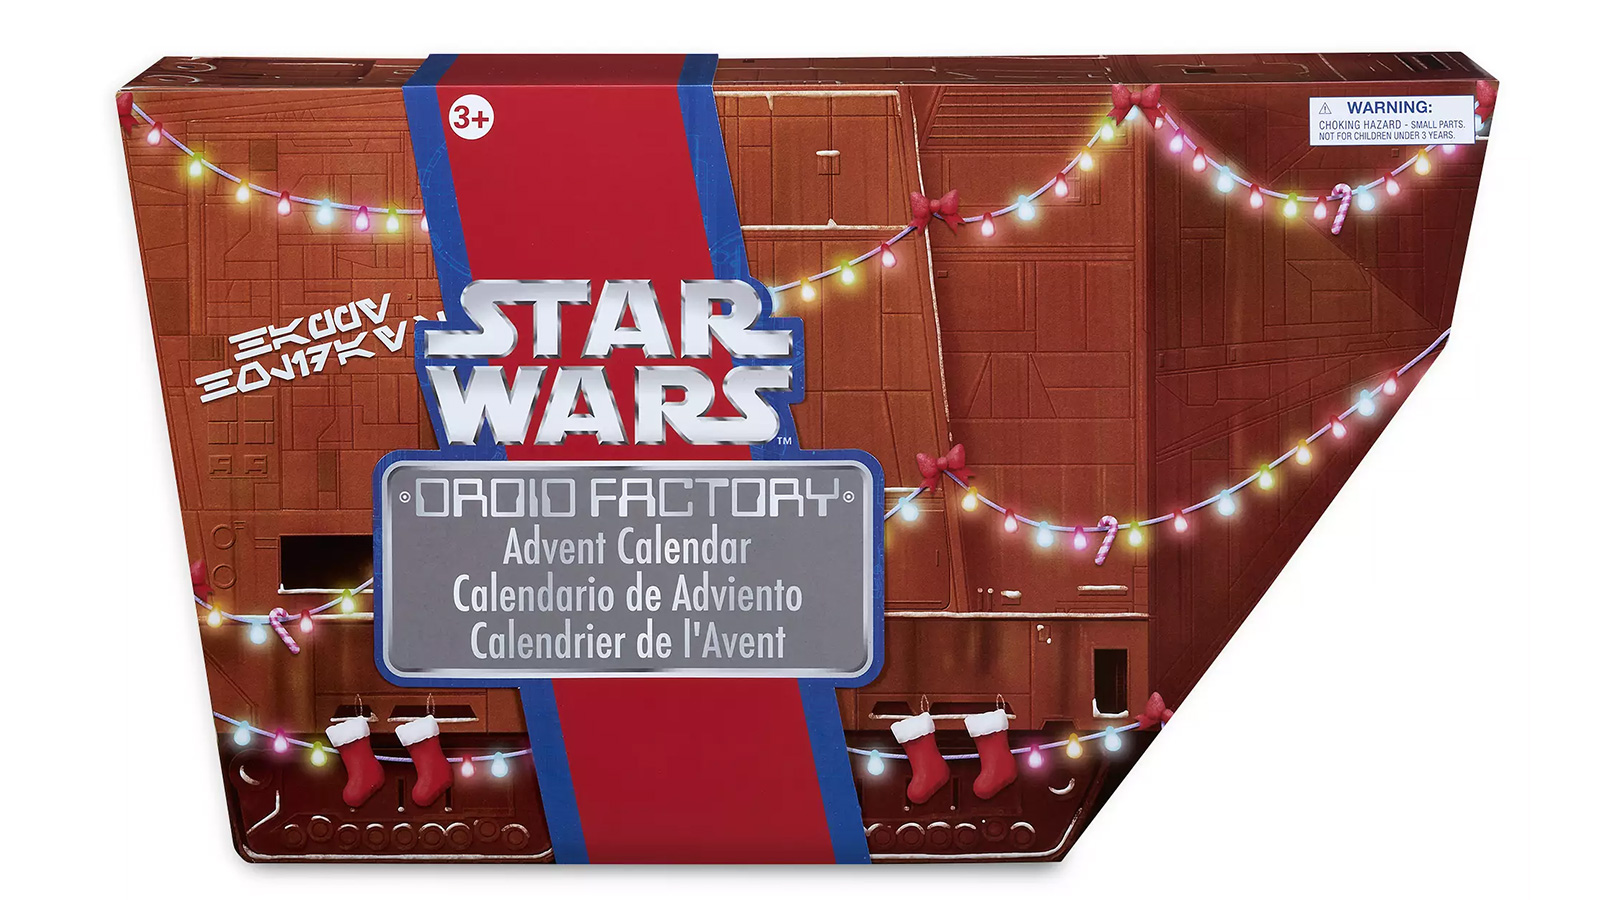 In Stock At Shop Disney - Exclusive Star Wars Droid Factory Advent Calendar